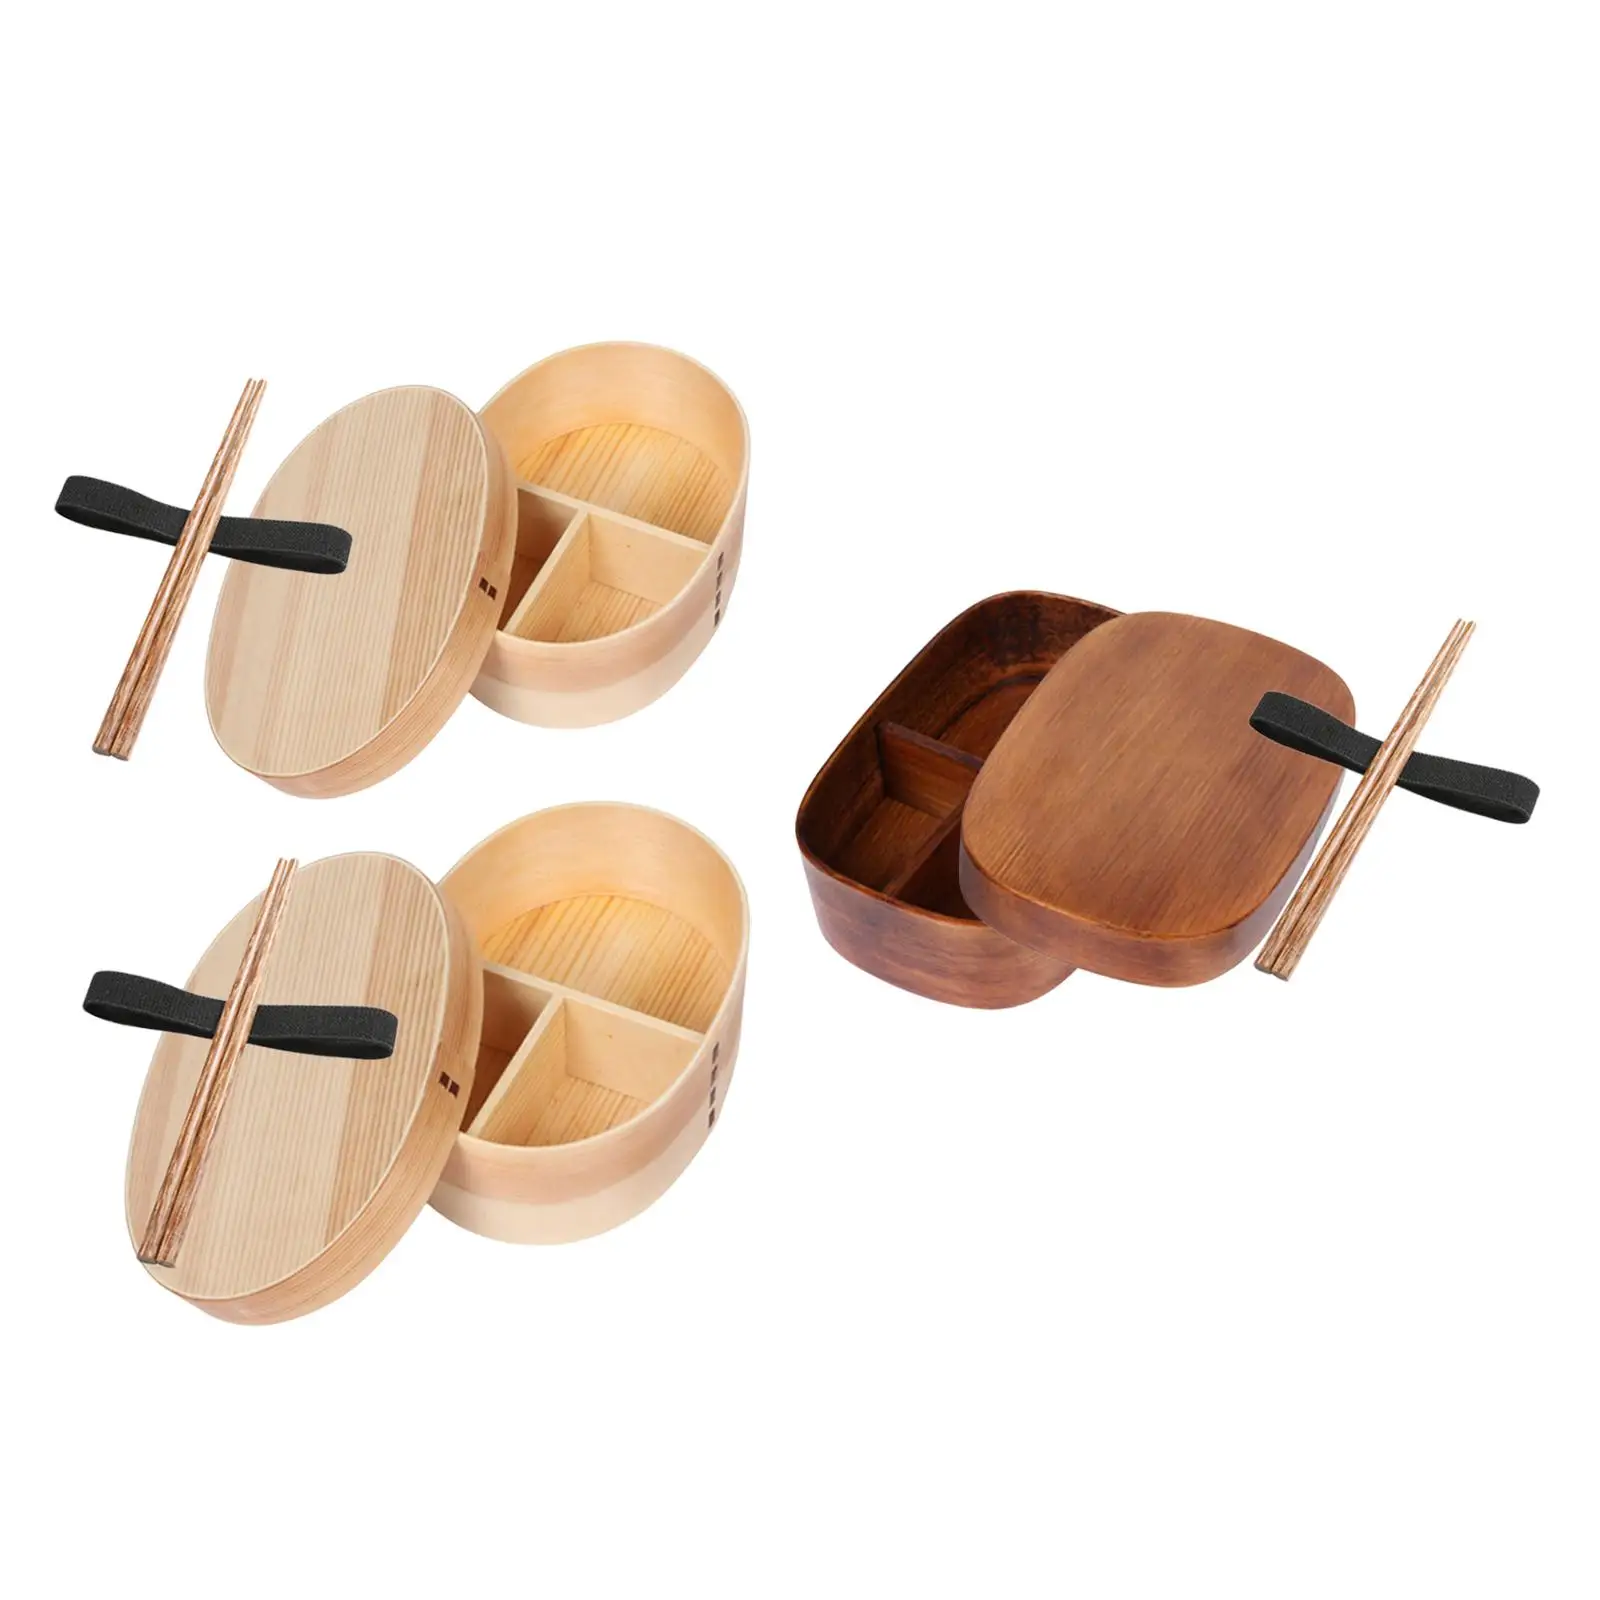 Japanese Style Bento Box Wood Lunch Box with Chopsticks for Storage Sushi, Vegetable, Rice etc Tableware Bowl Container